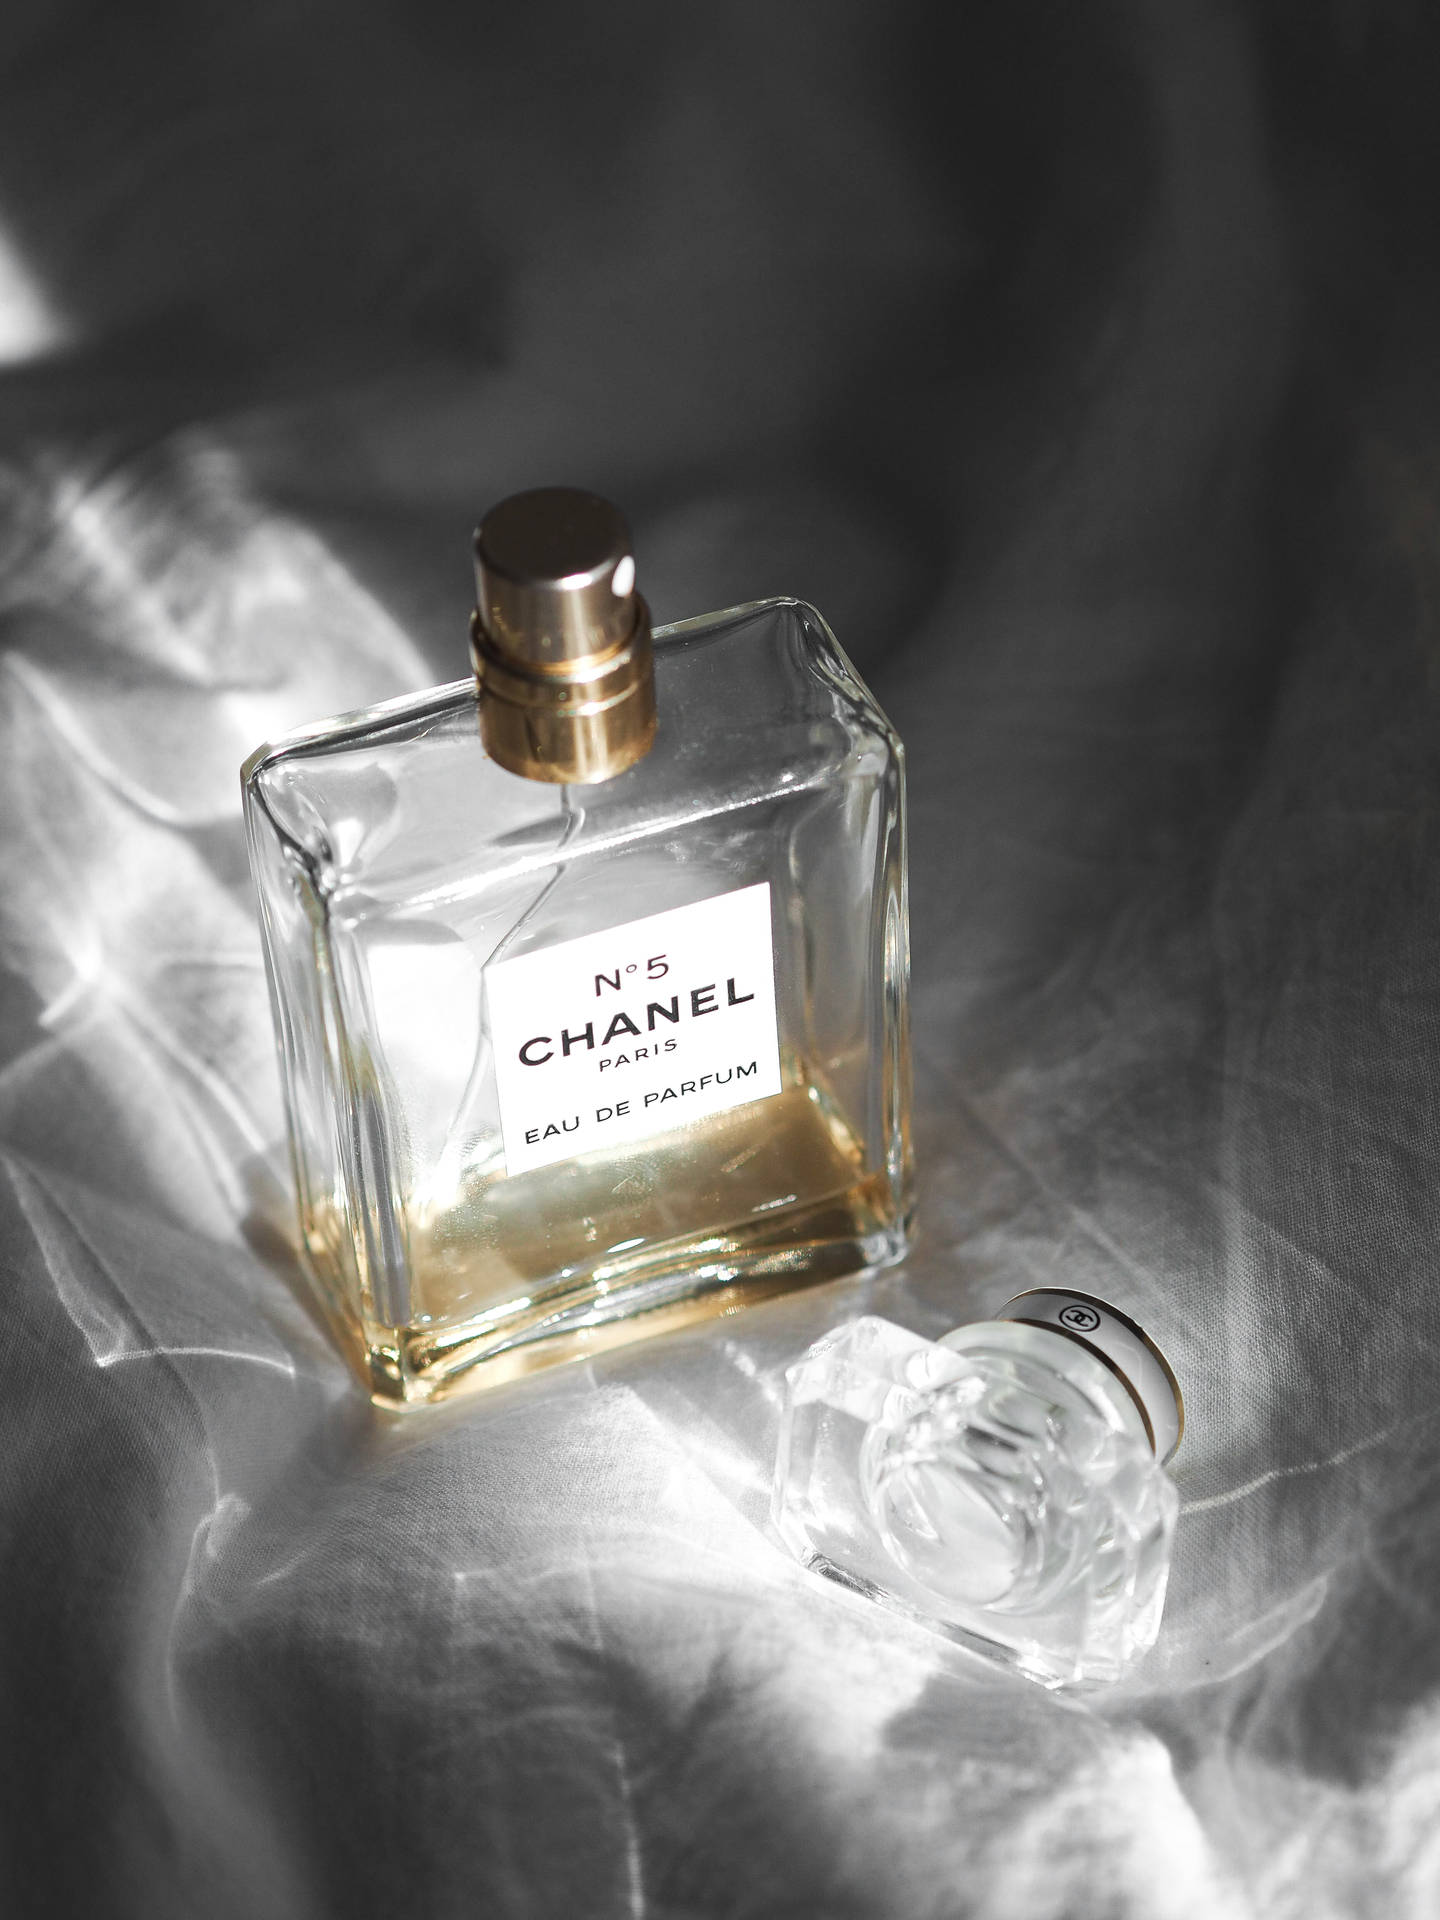 Chanel No.5 Light Reflection Background